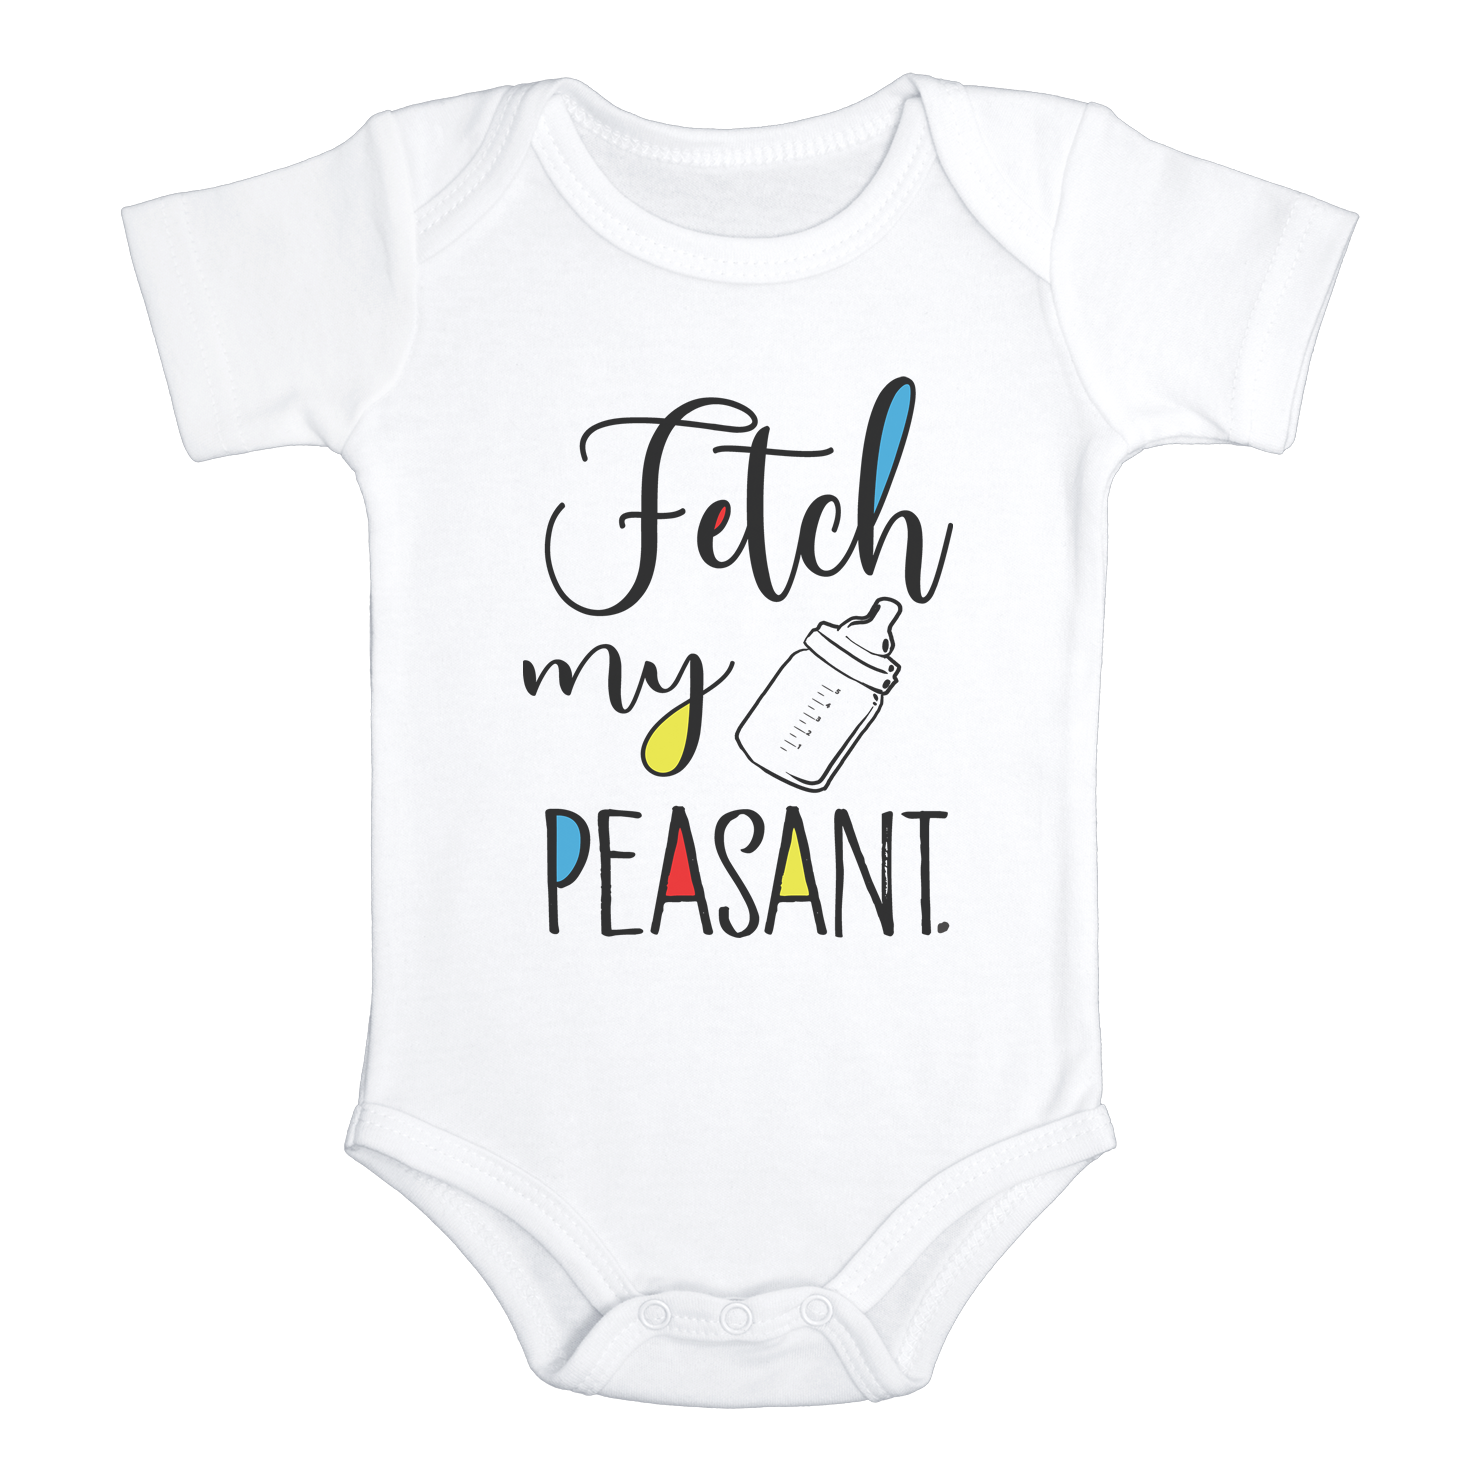 FETCH MY BOTTLE PEASANT Funny baby onesies bodysuit (white: short or long sleeve) - HappyAddition